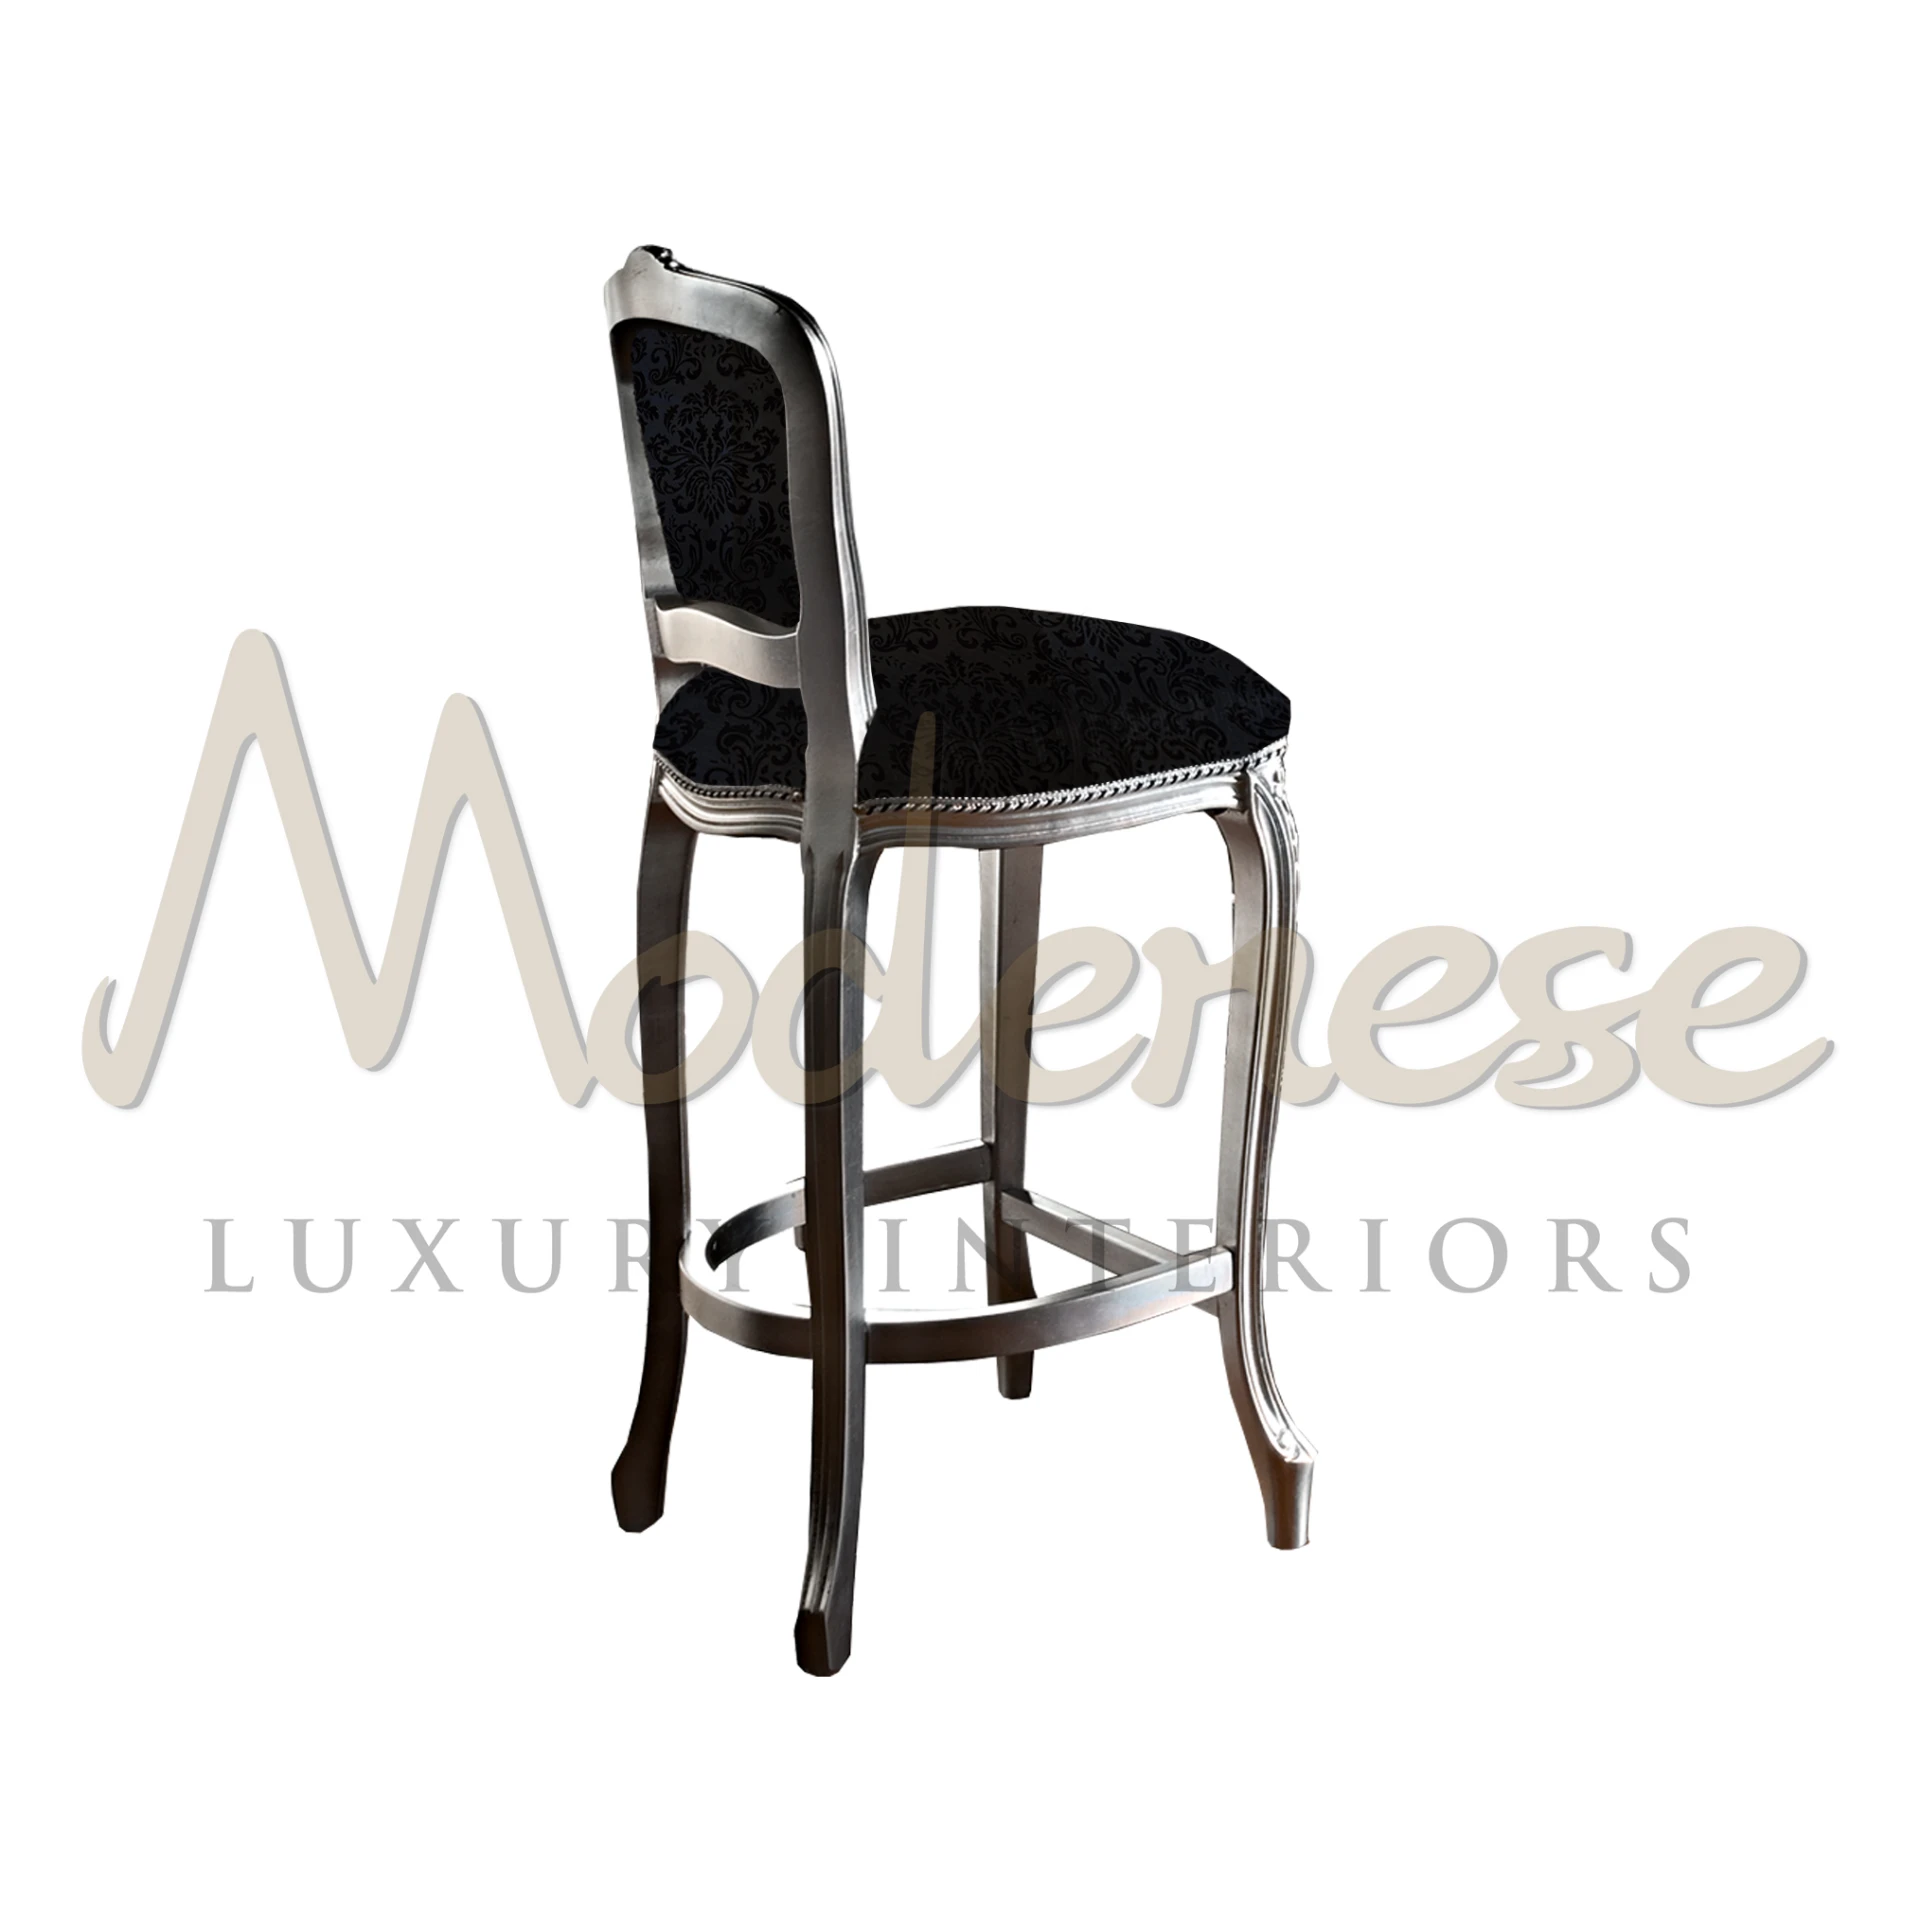 Crafted with solid wood frame, black fabric seats, and elegant silver leaf finish footrest. Perfect for classic or casual settings.